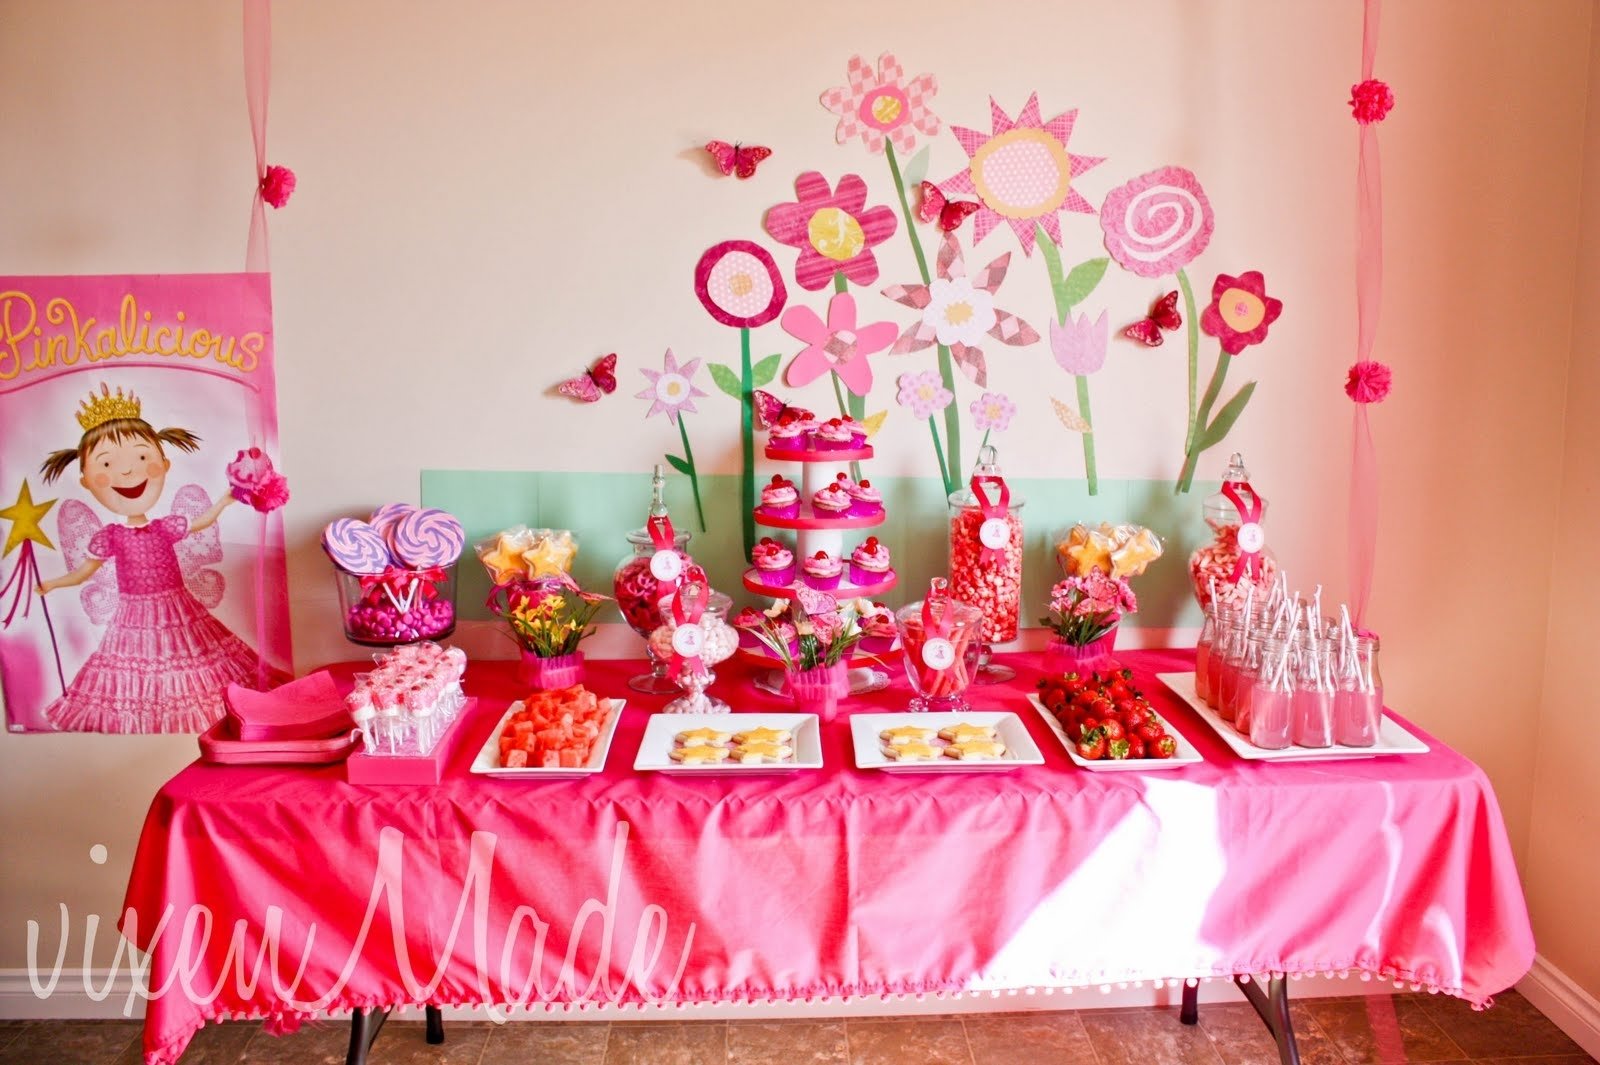 10 Most Recommended Birthday Party Theme Ideas For Girls 50 birthday party themes for girls i heart nap time 1 2022